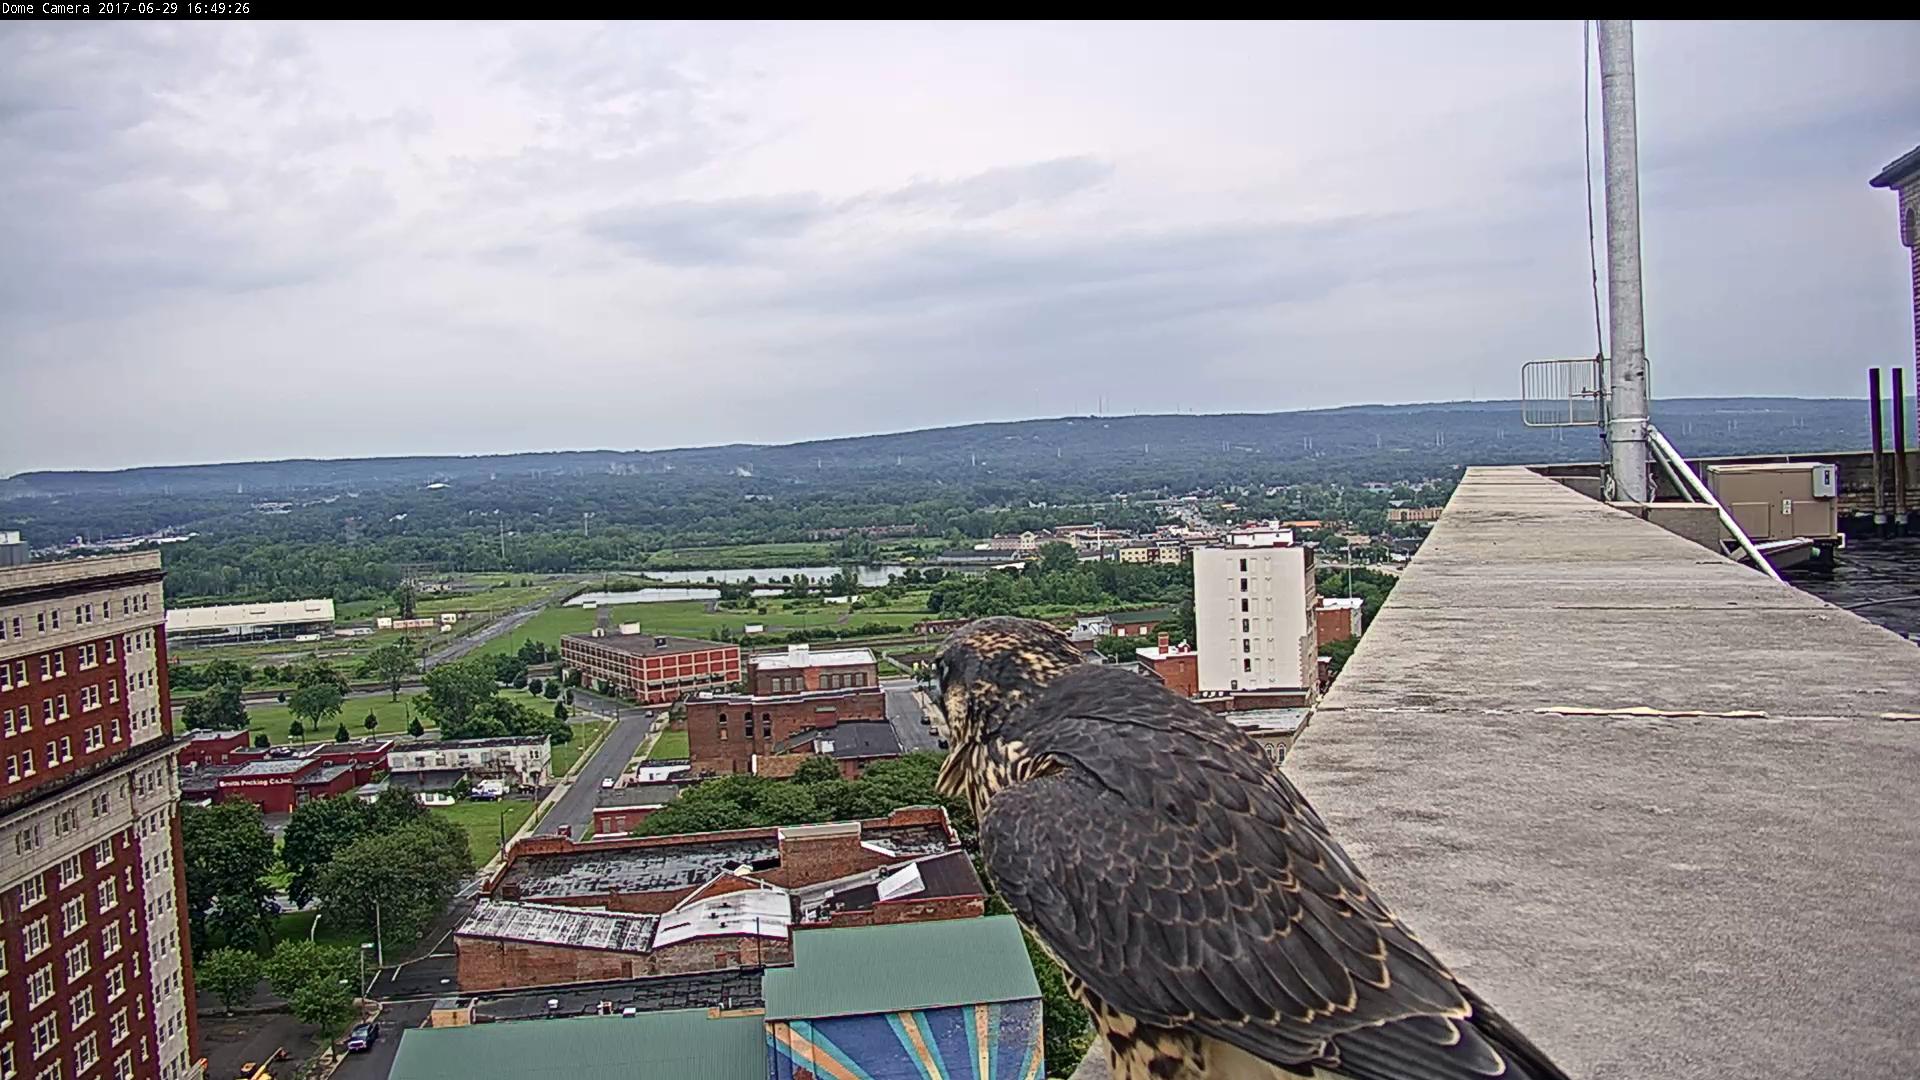 We love it when they perch near our PTZ camera